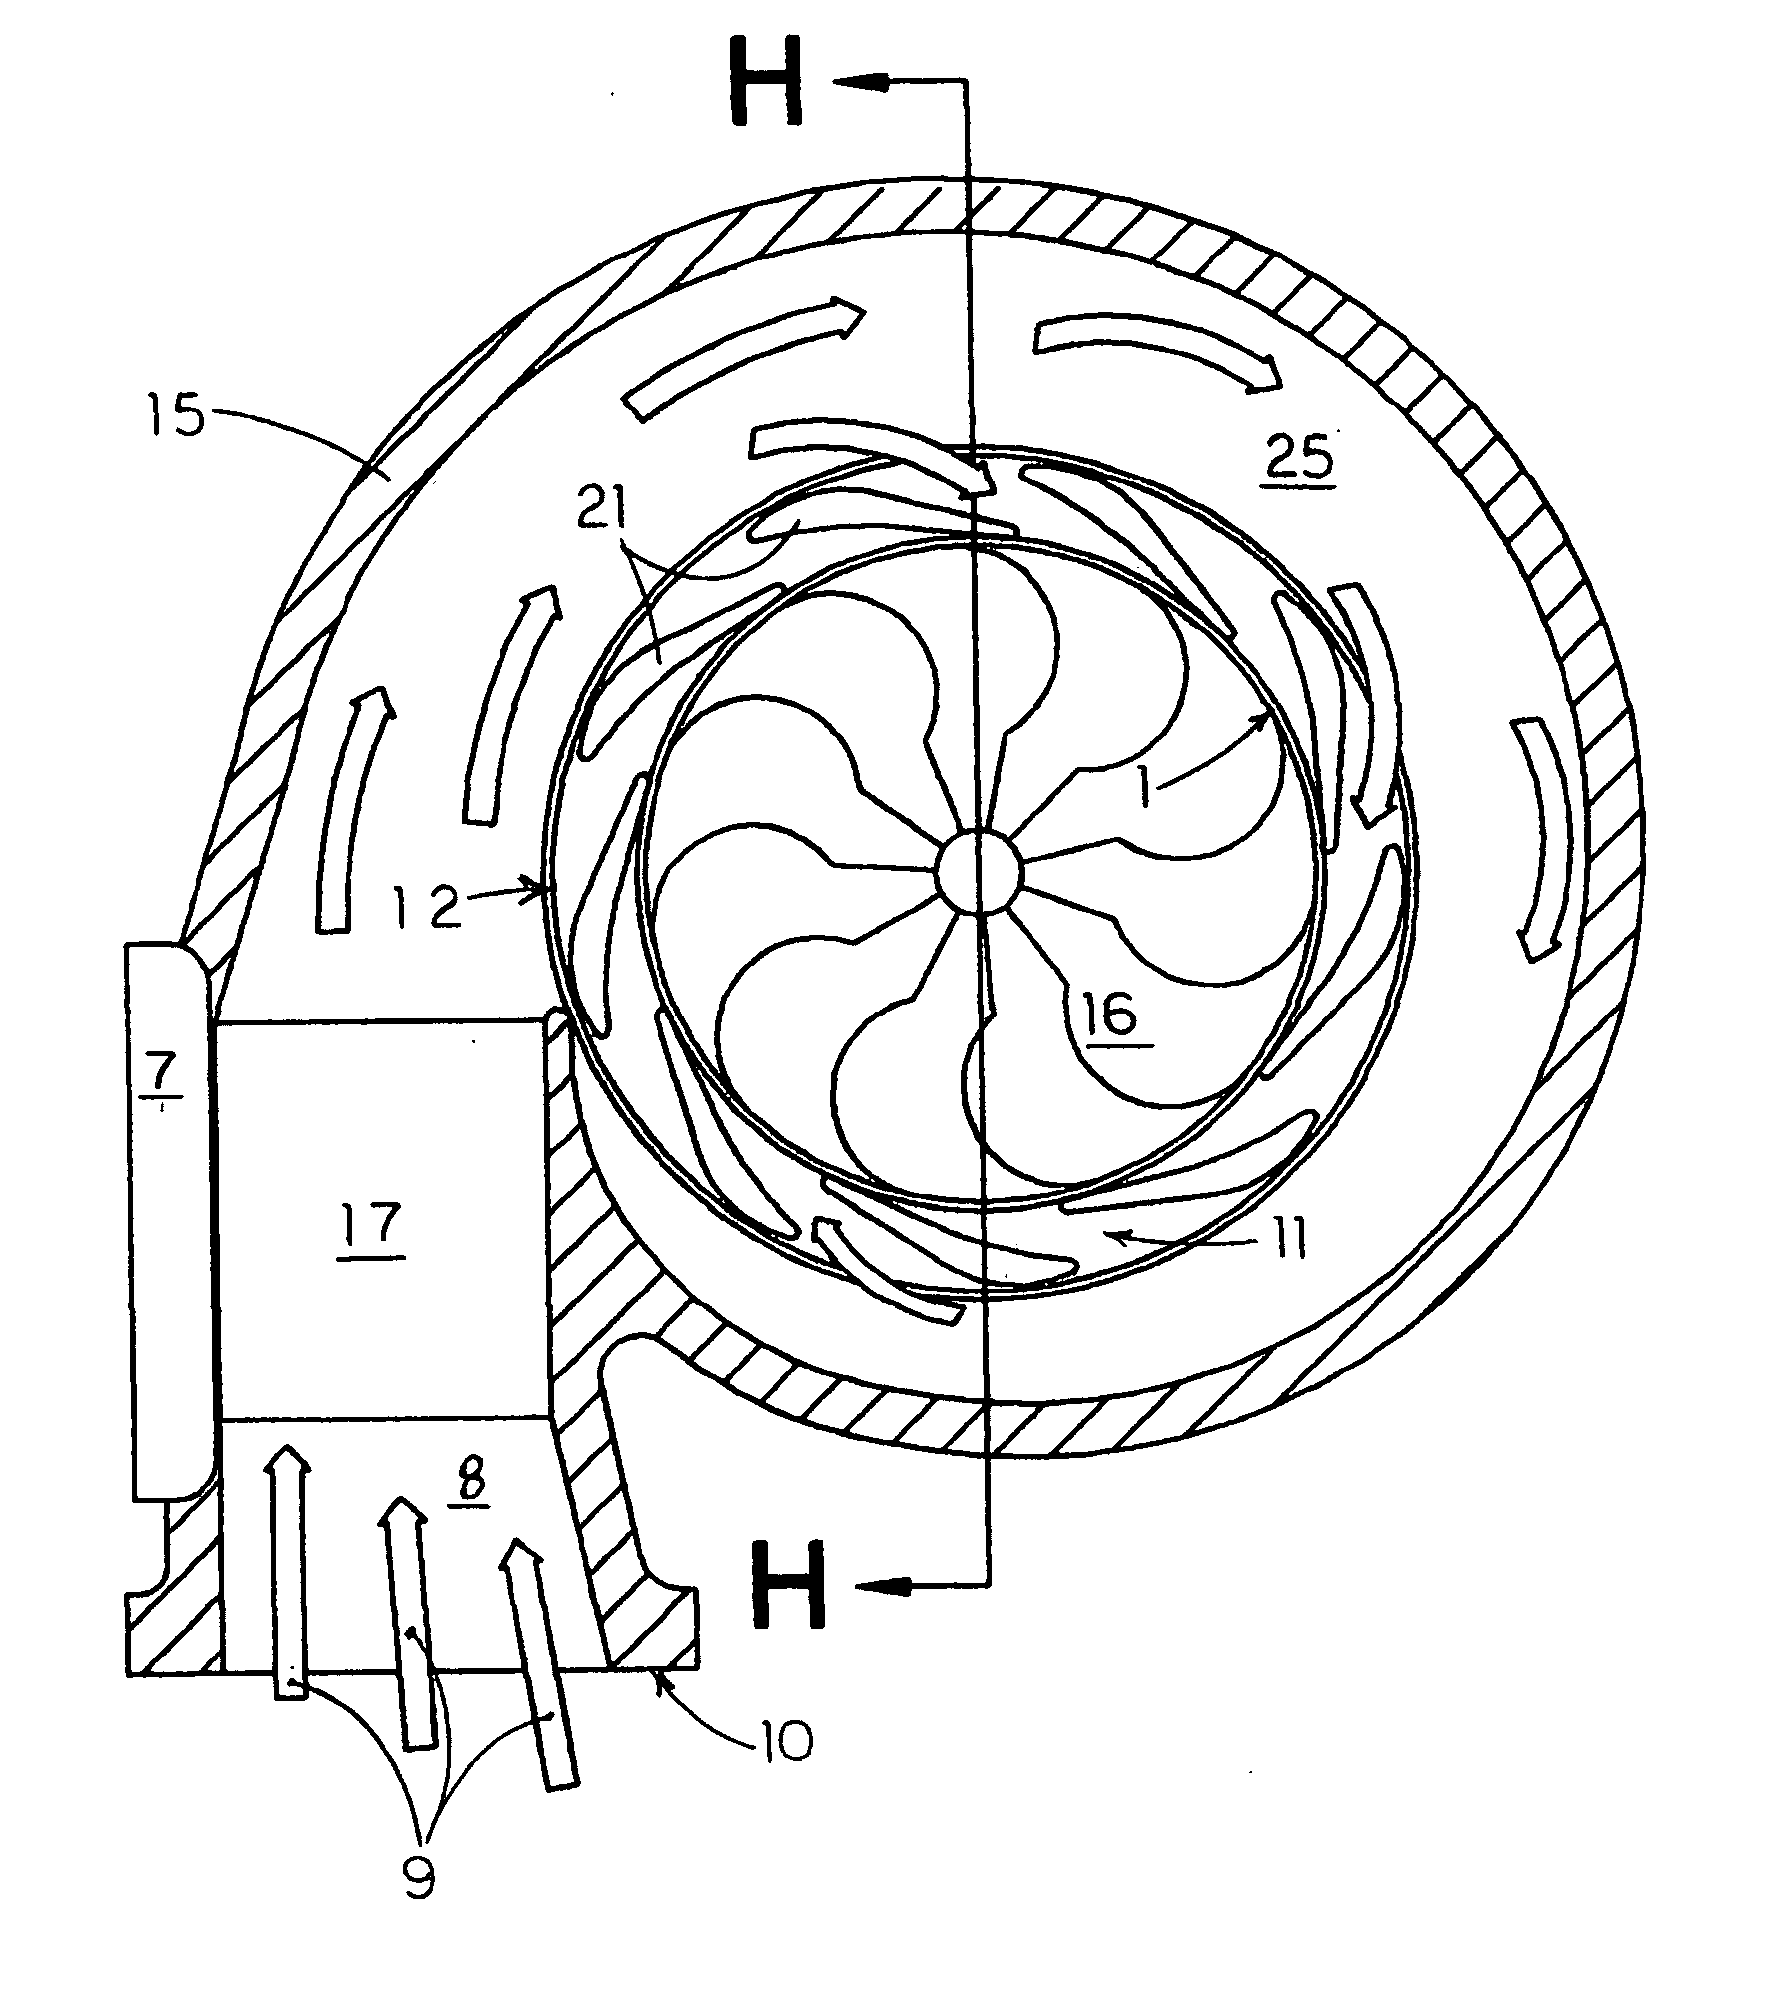 Multiple nozzle rings and a valve for a turbocharger